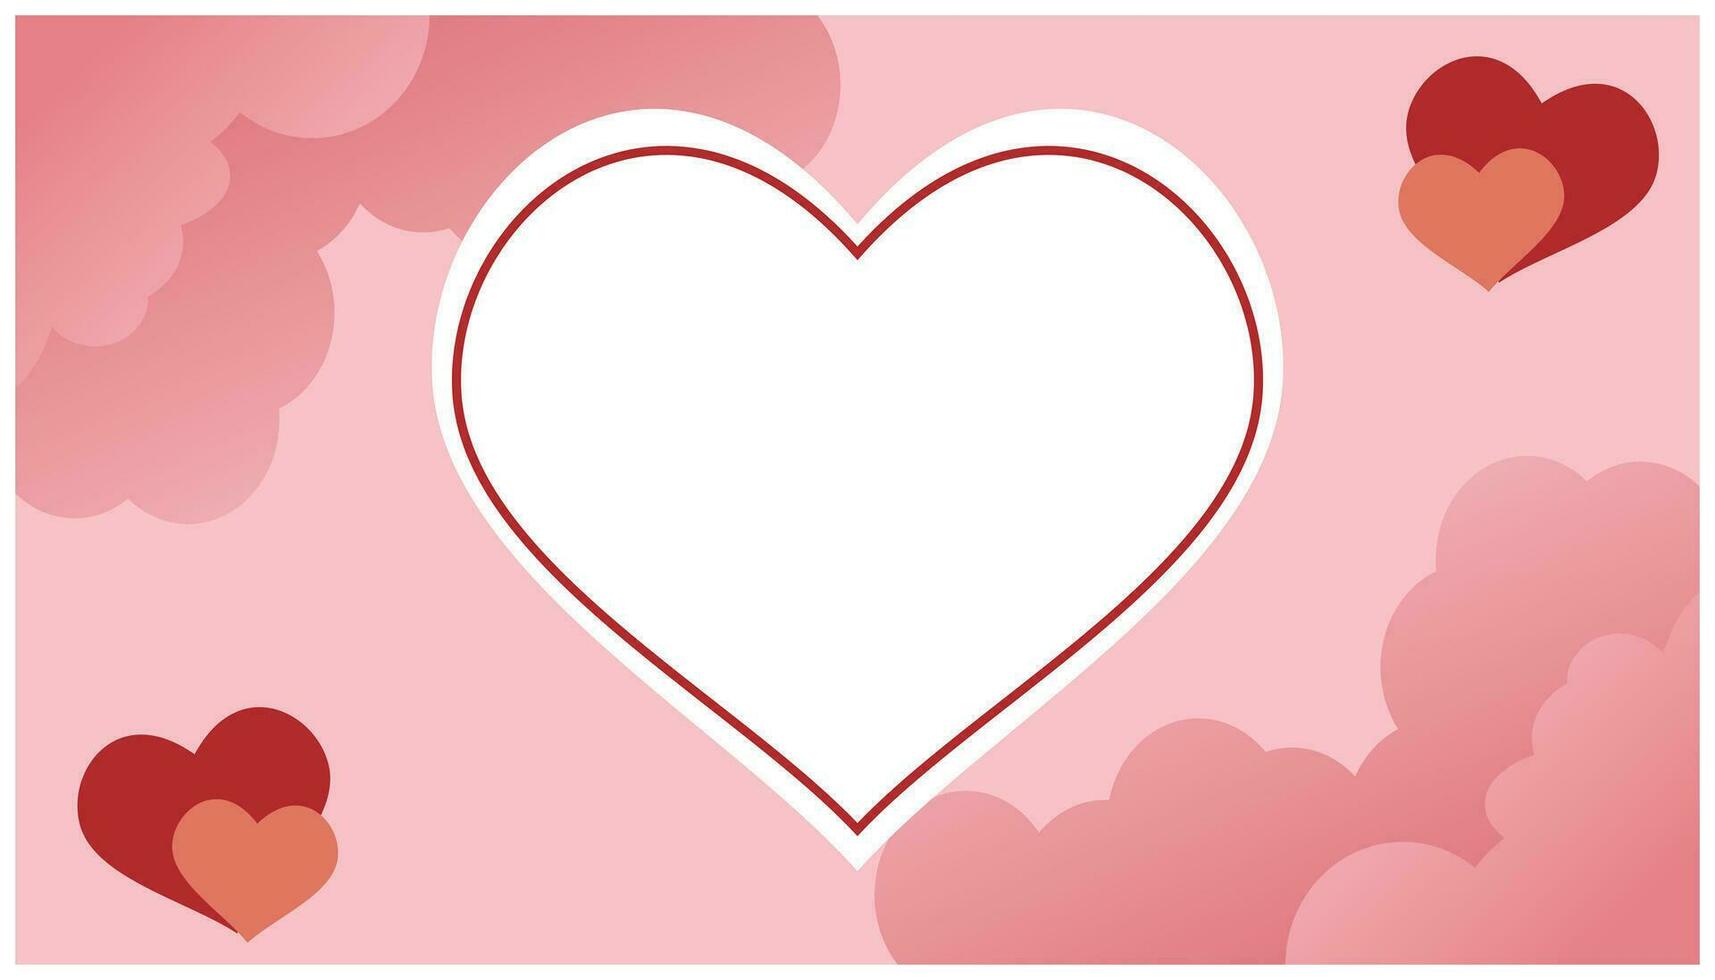 Valentine's day greeting card with hearts. Vector illustration. Design elements that are romantic and full of love, expressions of affection for greeting cards, banners and others